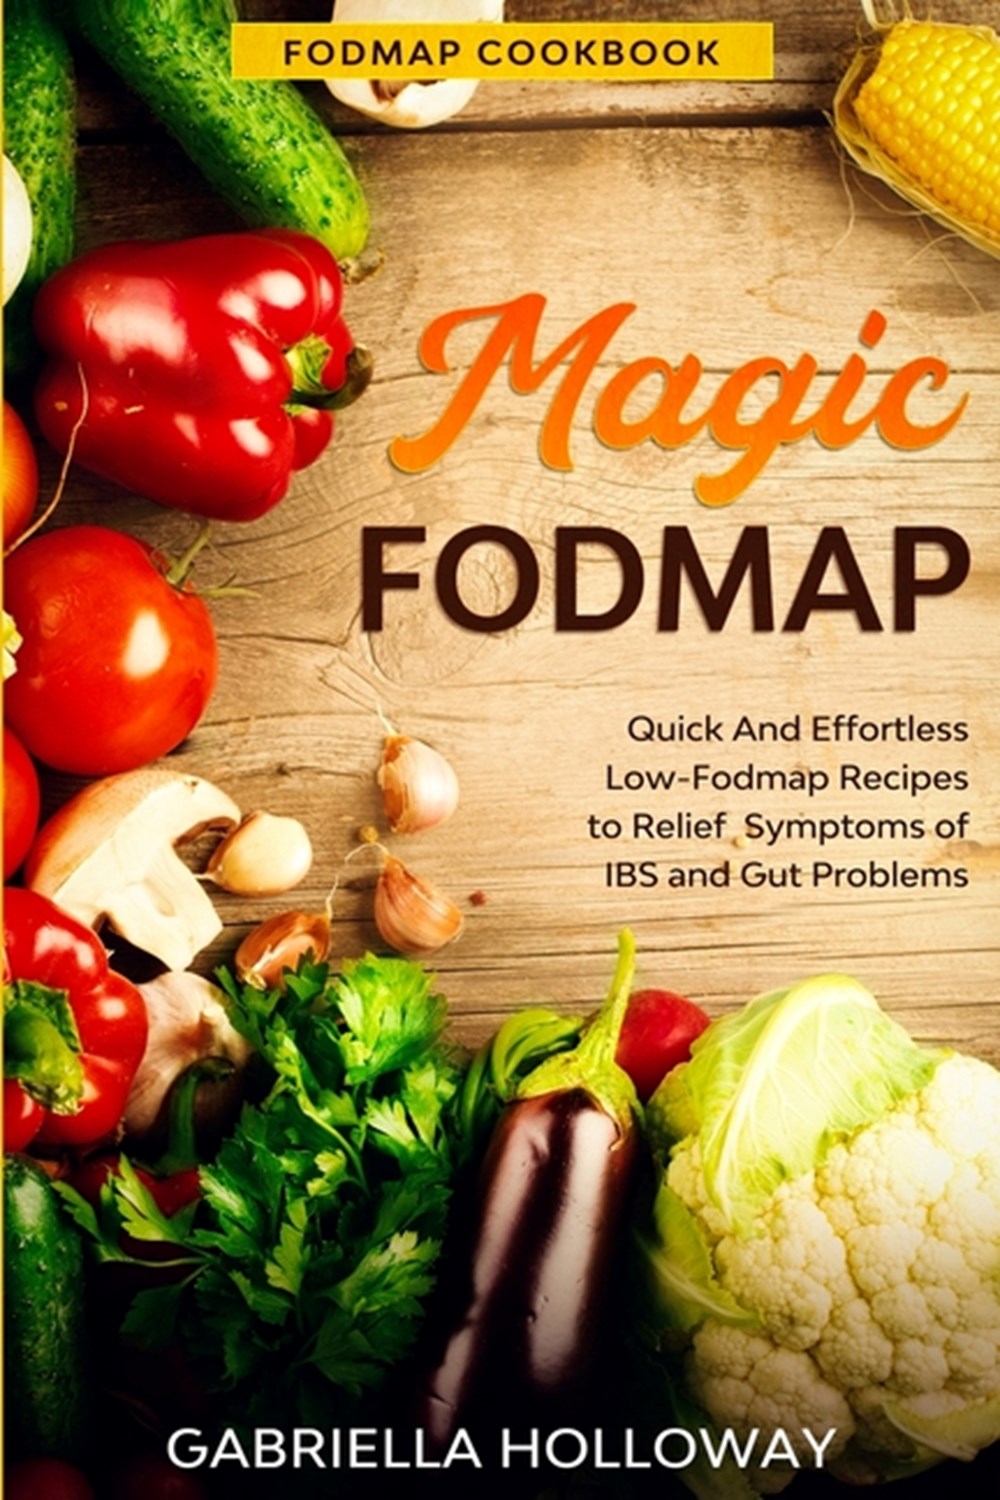 Fodmap Cookbook: FODMAP MAGIC - Quick And Effortless Low-Fodmap Recipes to Relief Symptoms of IBS an